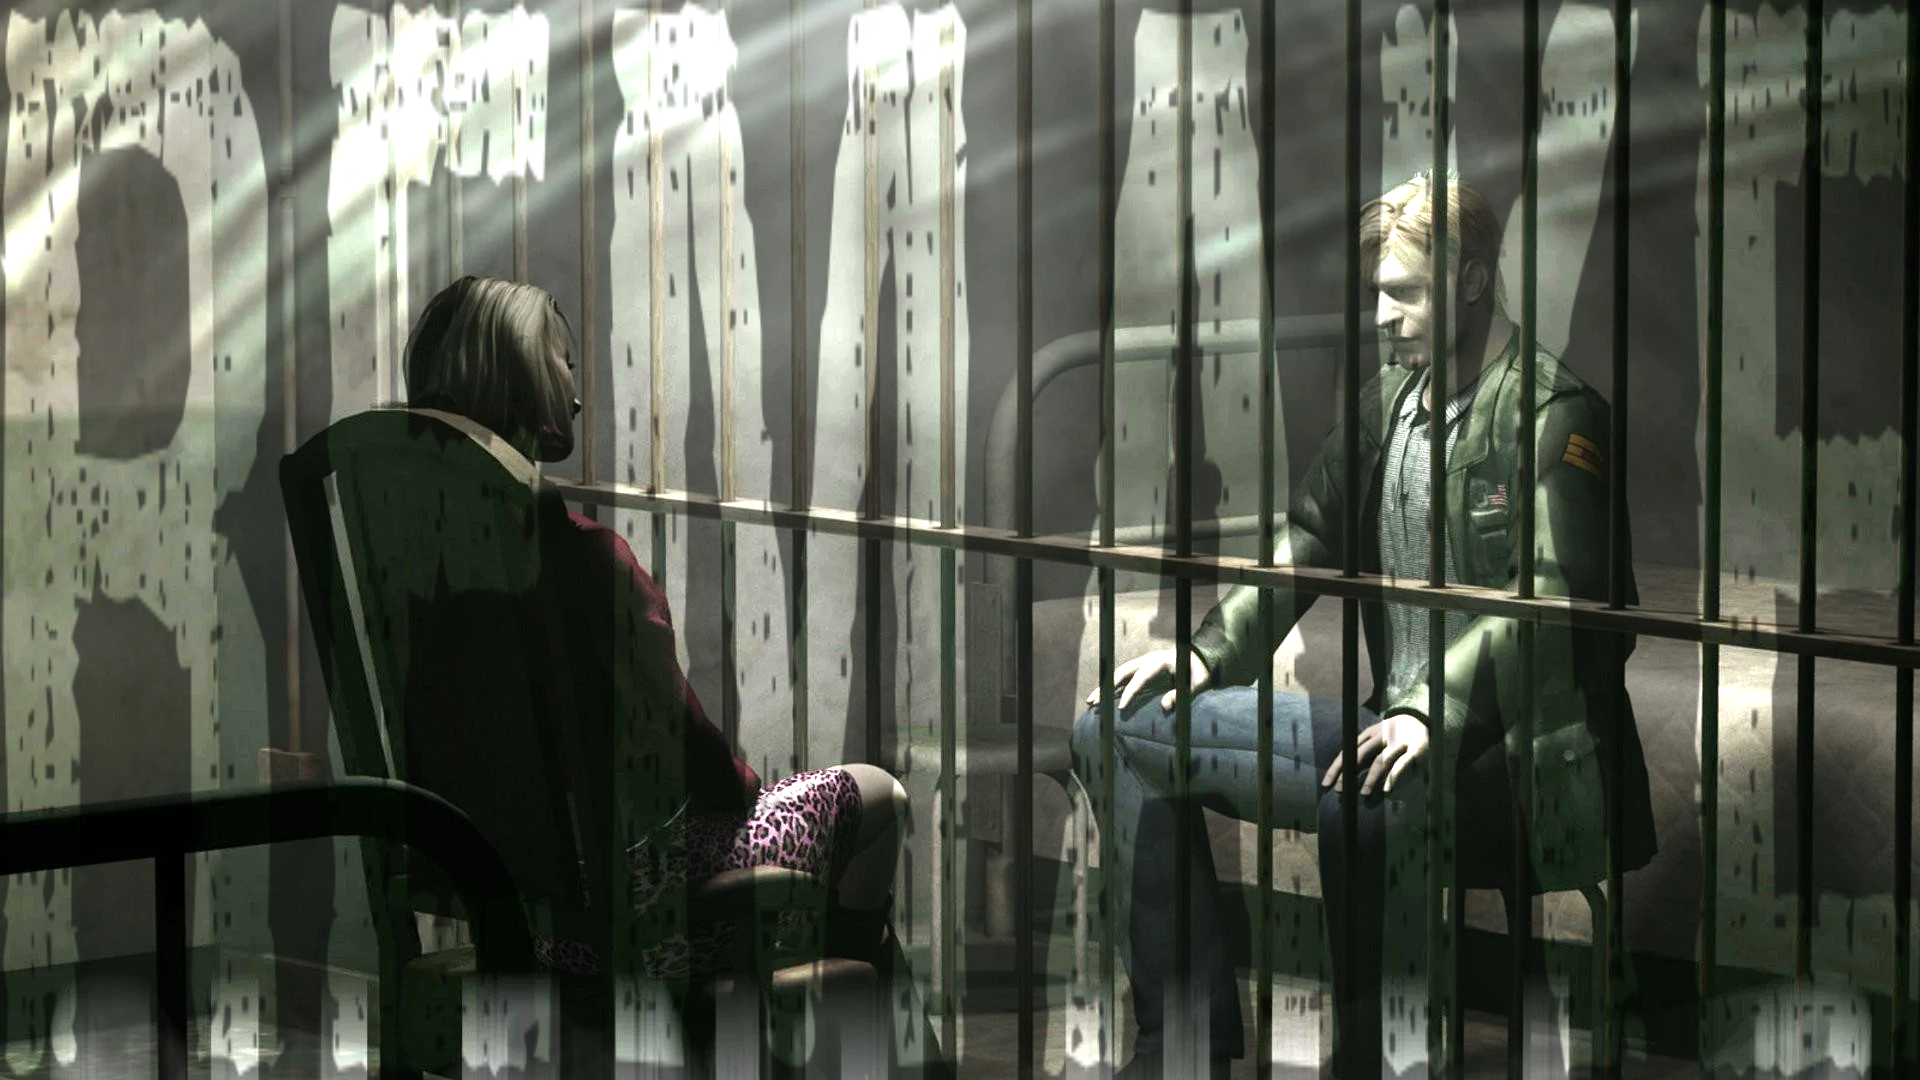 Silent Hill 2 Remake Release Date Potentially Revealed